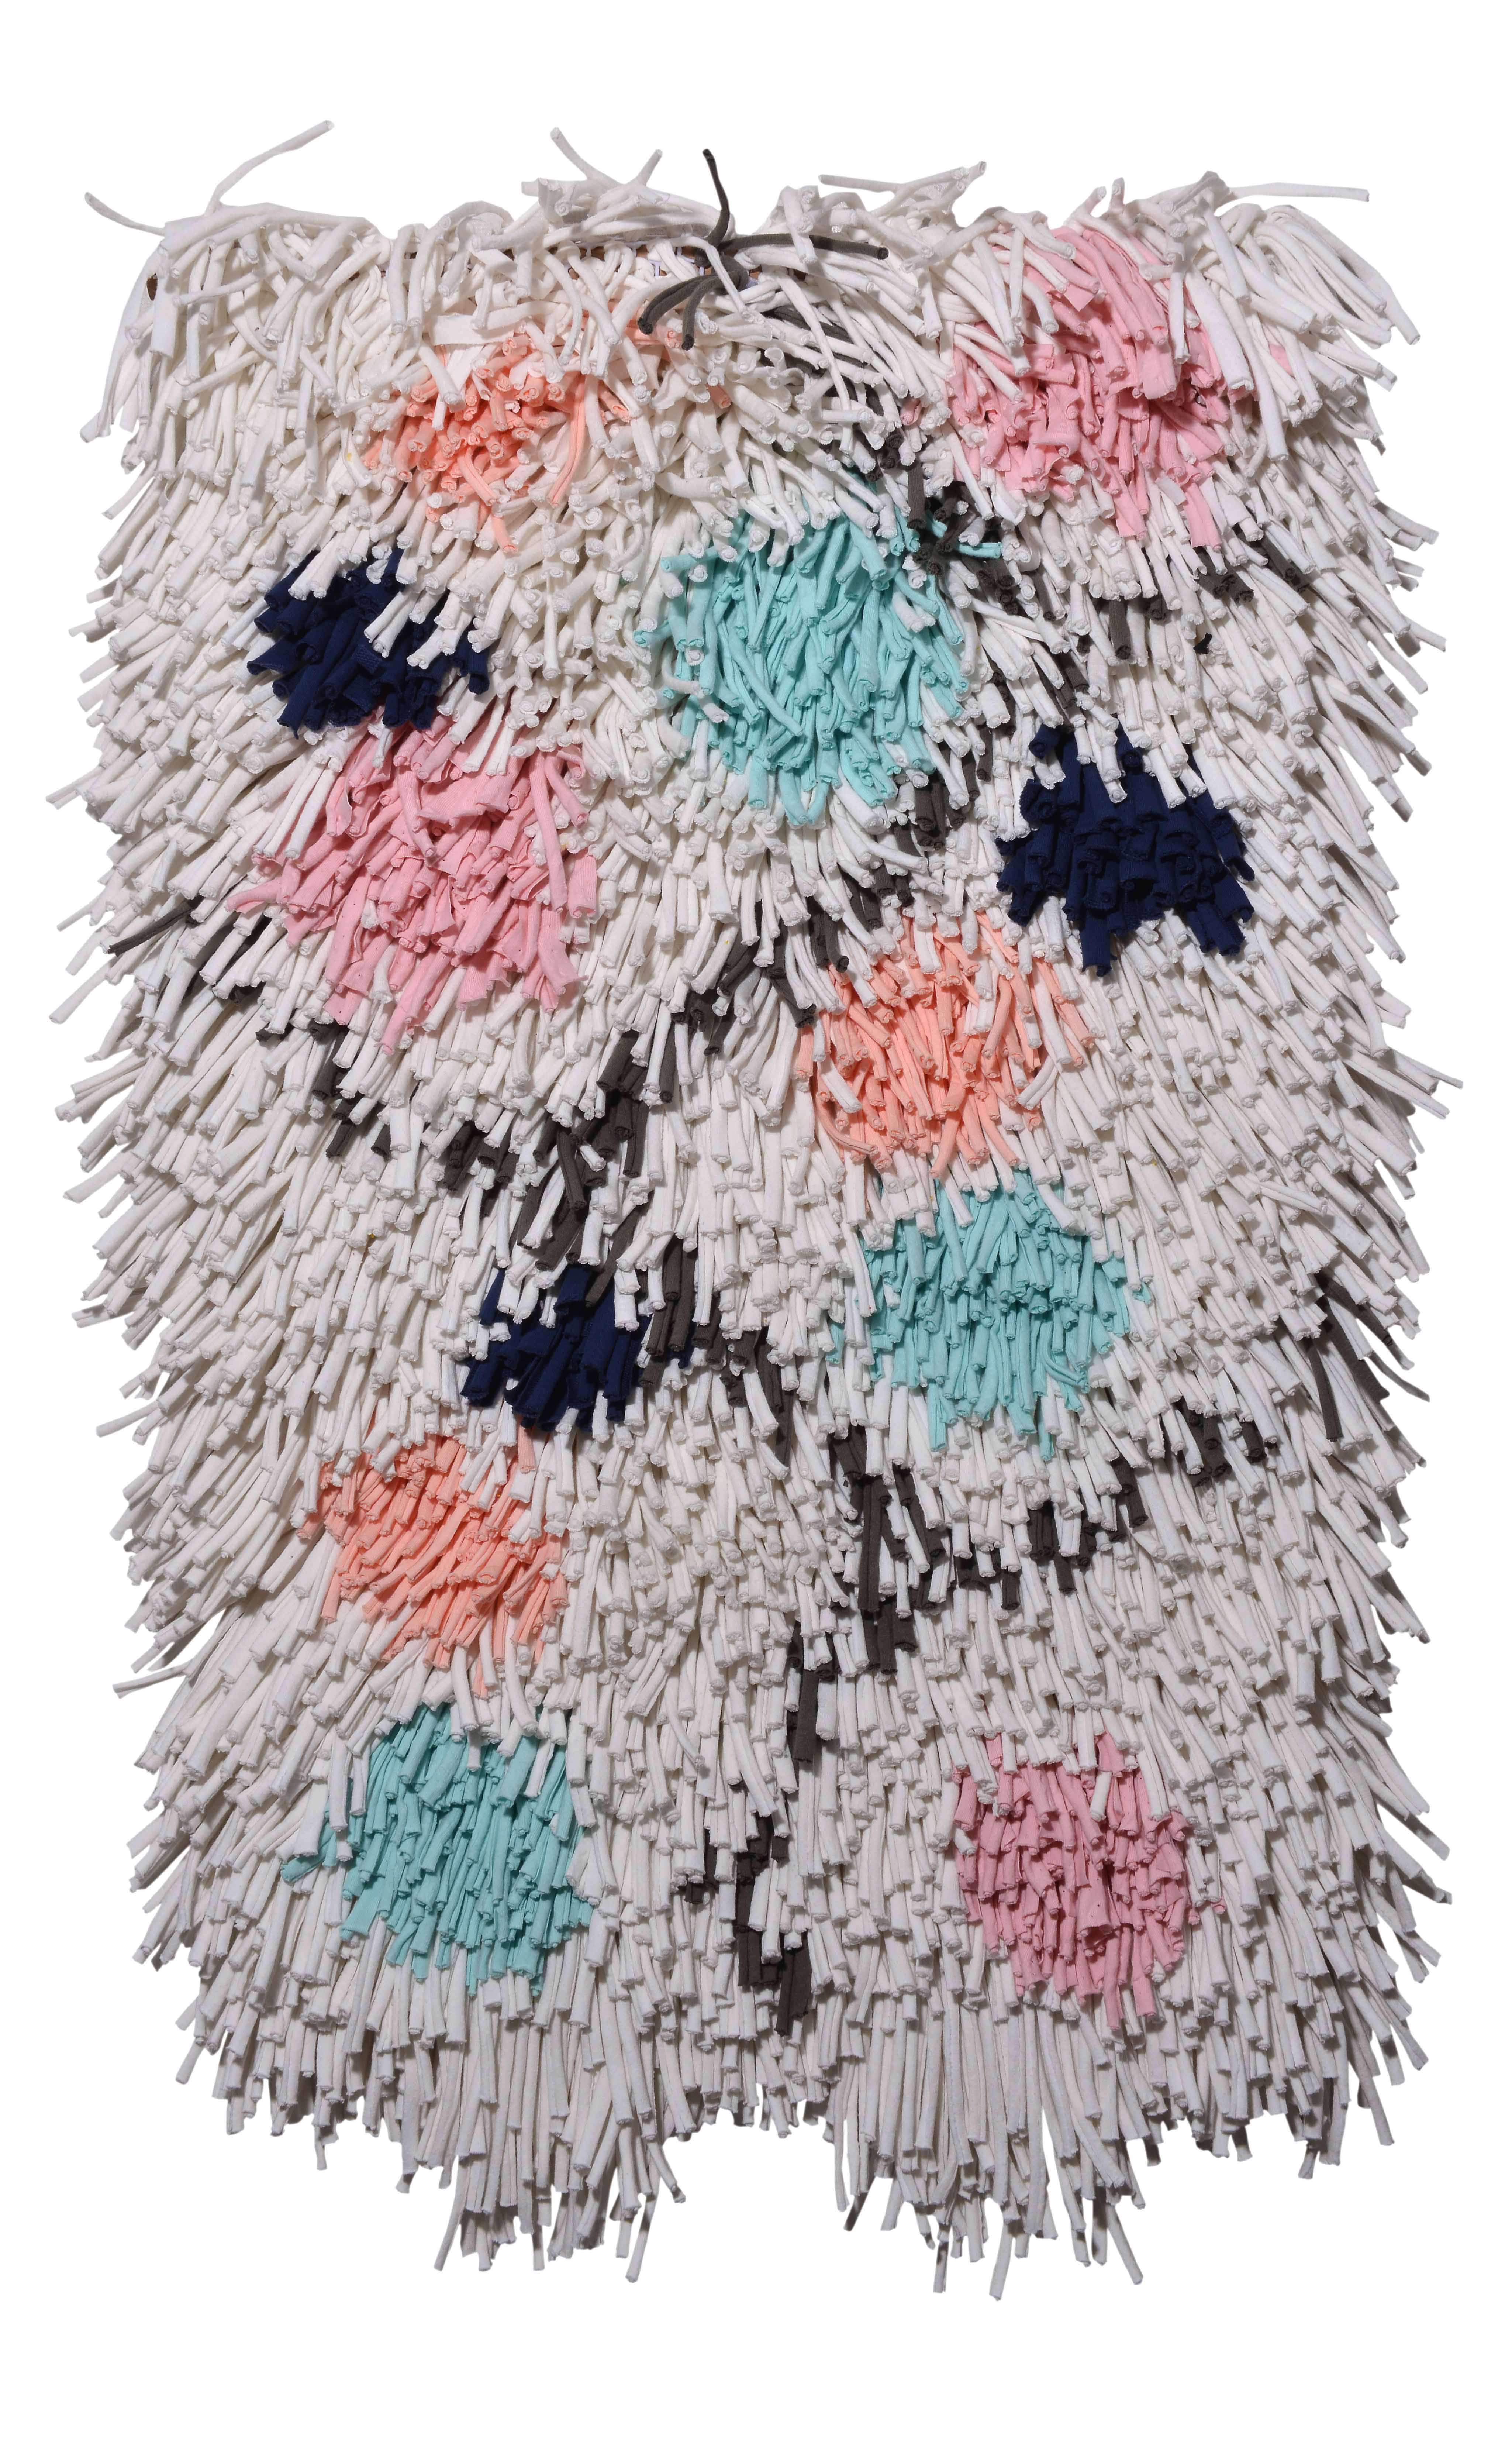 'Wish Balls' throw rug by Ragmate is made using the same repurposed fabric texture as the original Ragamuf chair cover. | Image courtesy of Ragmate.